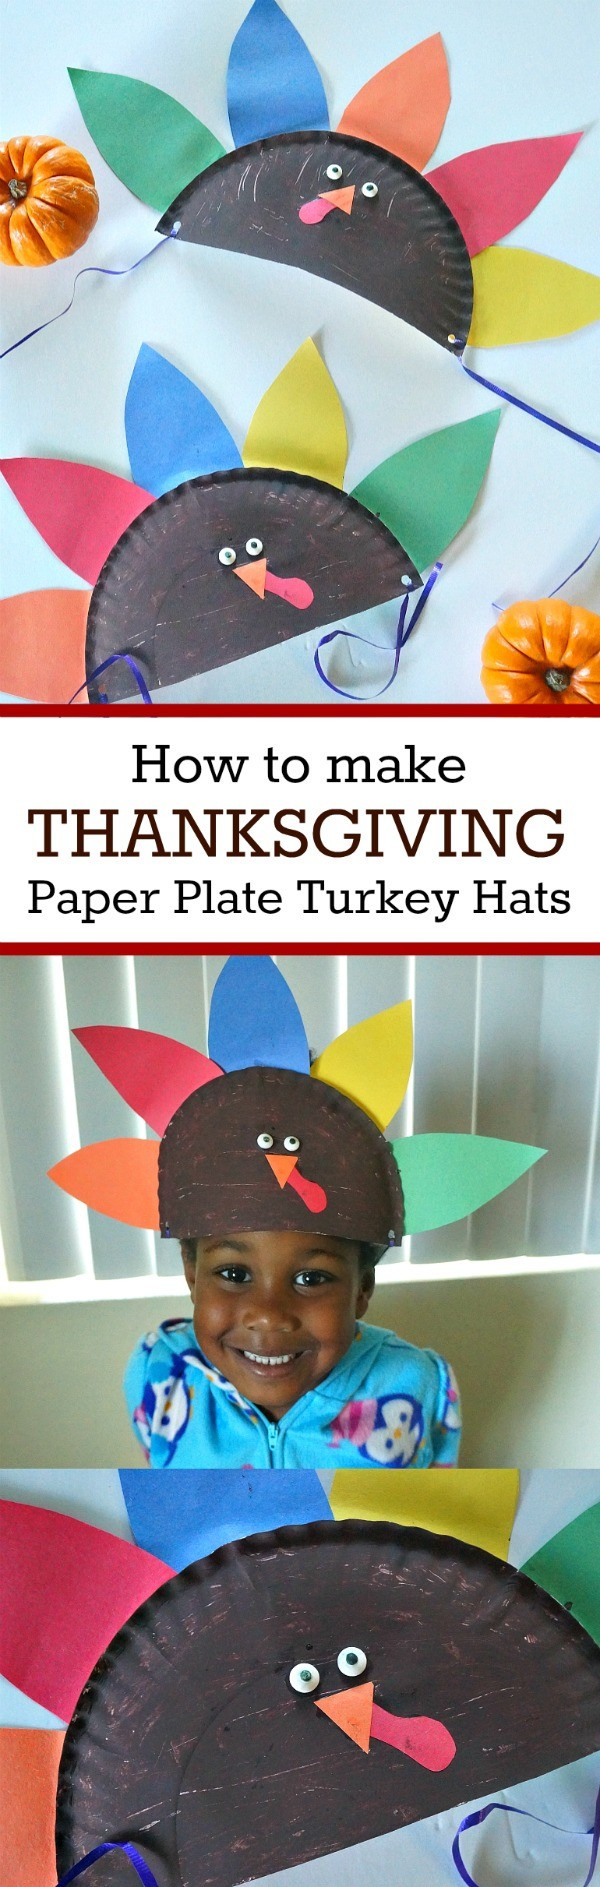 Pinterest Thanksgiving Crafts
 Thanksgiving Crafts For Kids Make Your Own Paper Plate